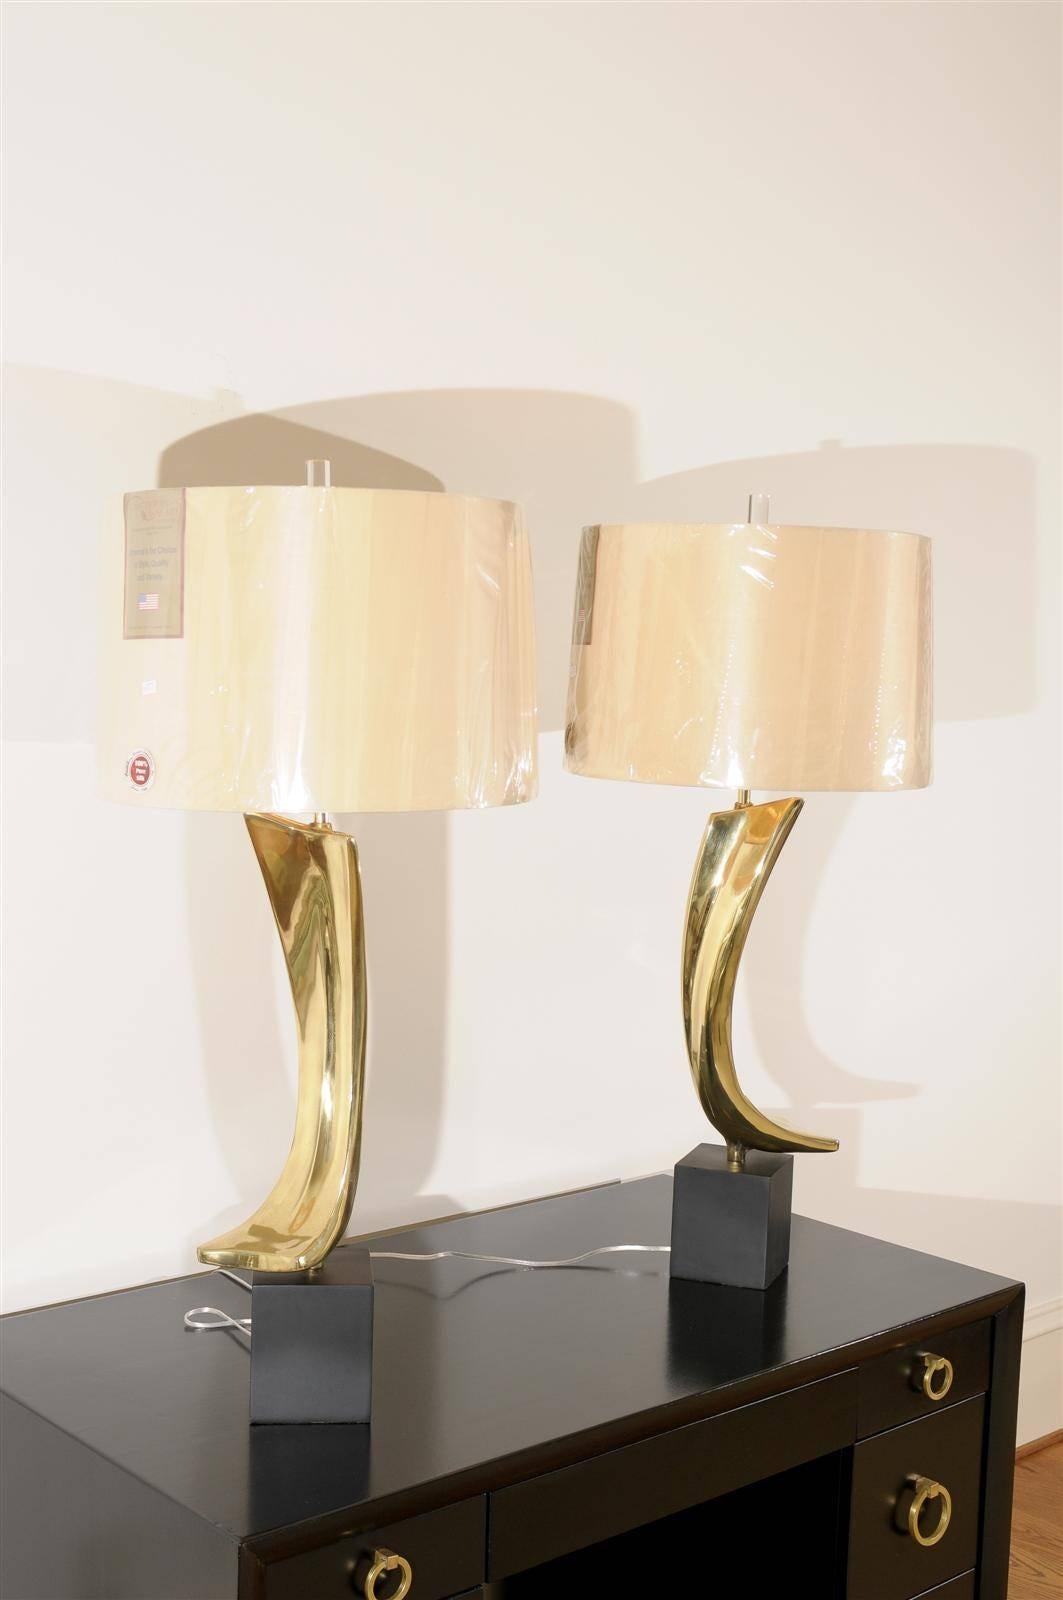 American Magnificent Restored Sculptural Pair of Large-Scale Lamps by Laurel, circa 1970 For Sale